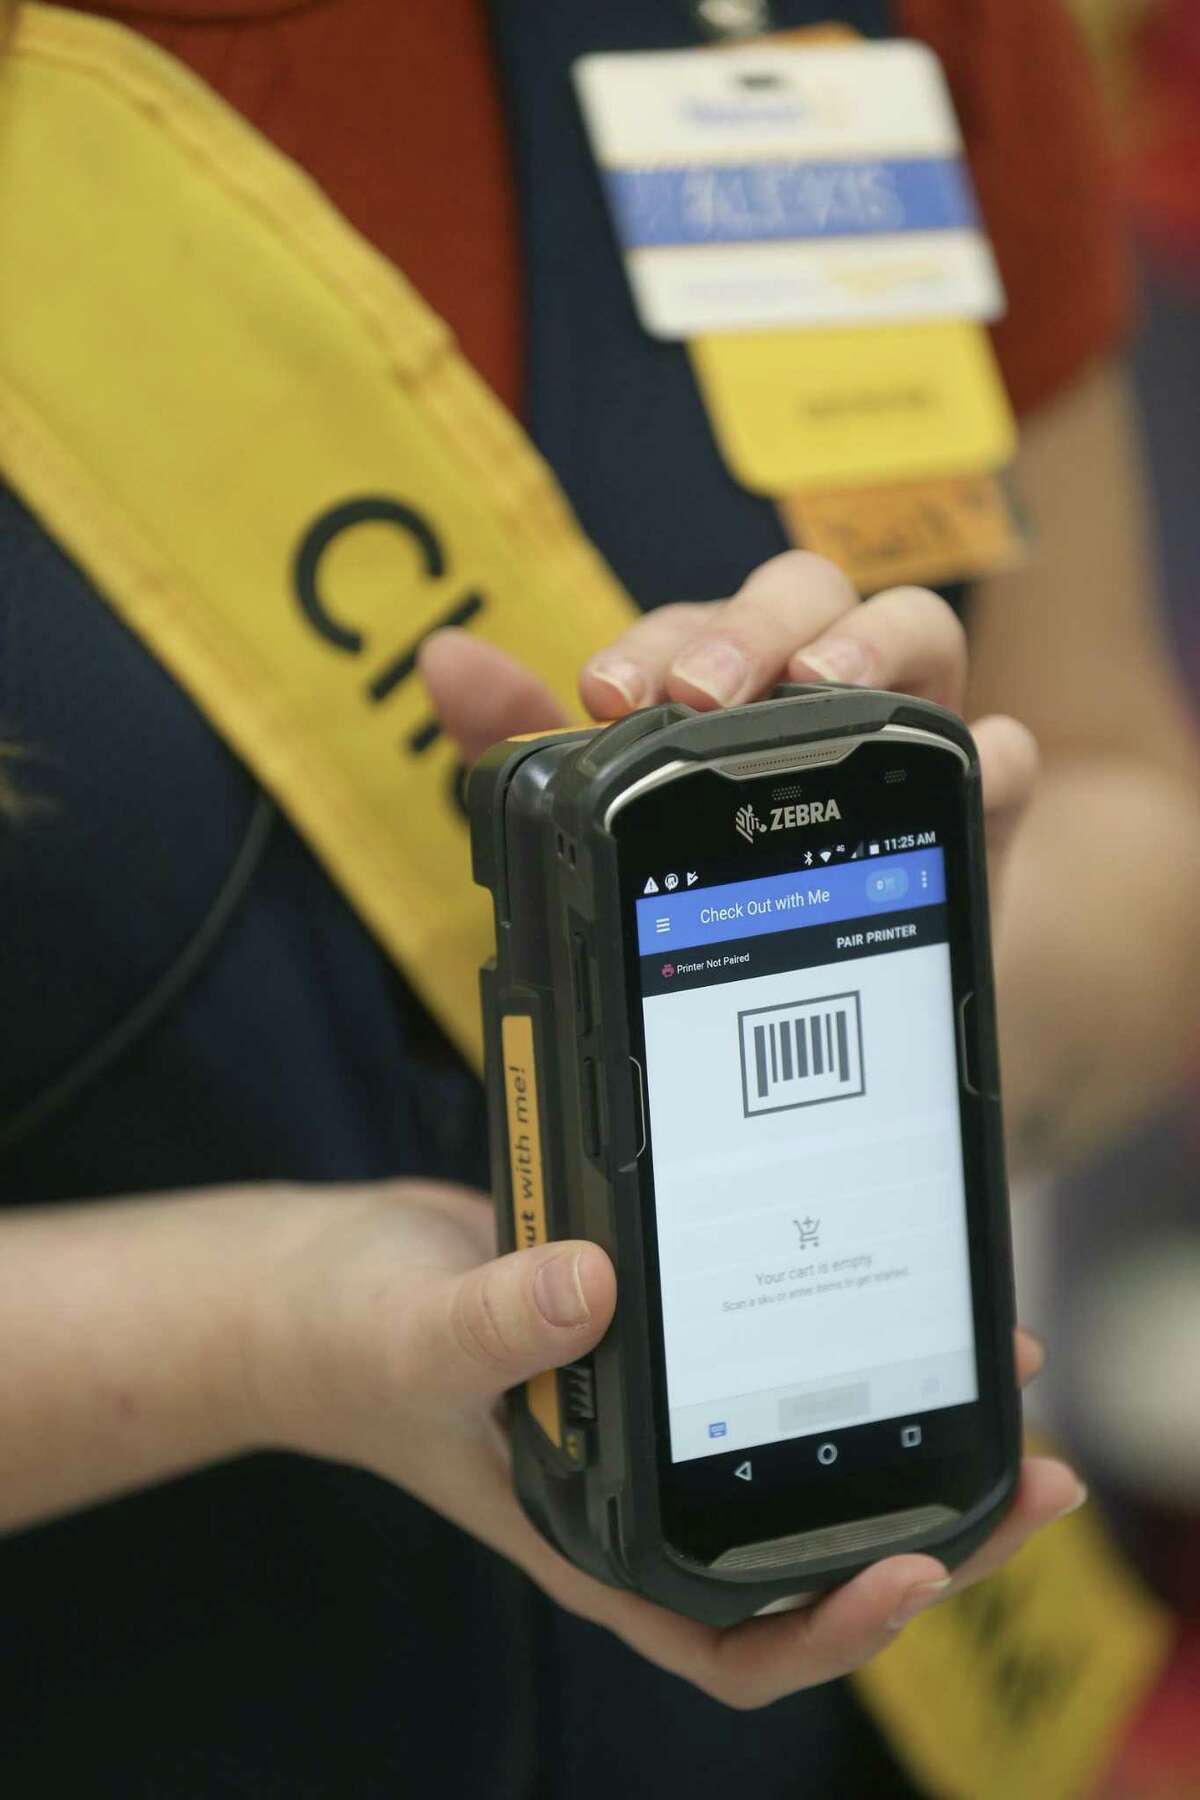 Alexis Byrd shows her hand-held check-out device Feb. 26, 2019 at the New Braunfels Walmart Supercenter that is used to check-out customers before they even get in line. The program that Walmart called "Check Out with Me" is one of the pieces of technology the company says it is using to improve shopping experiences in their stores.